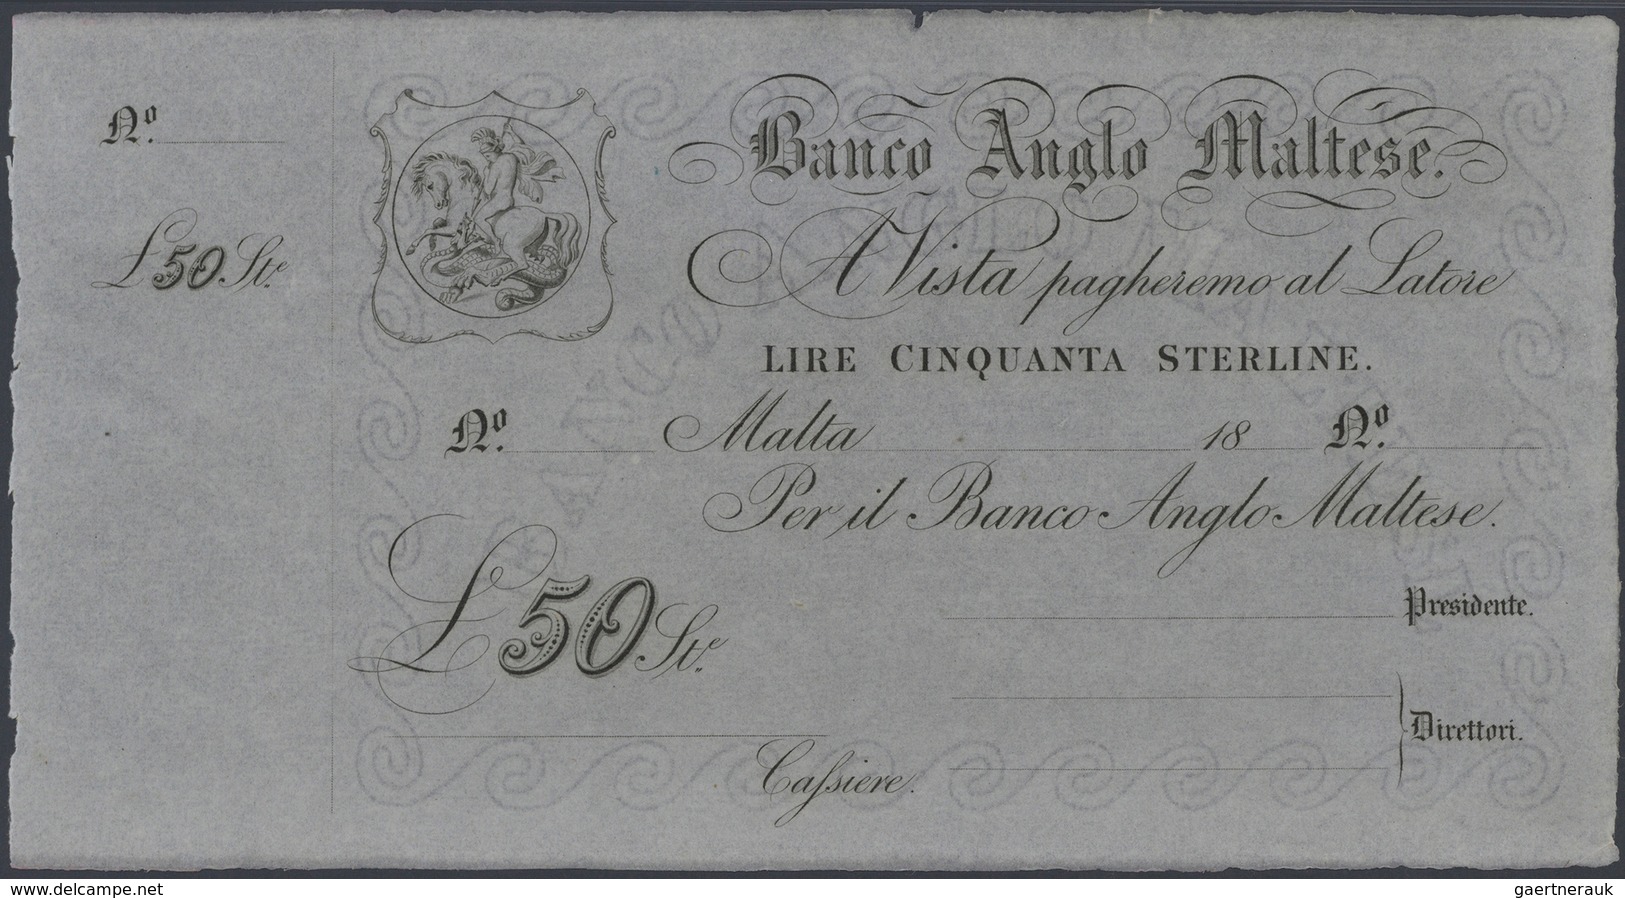 Malta: Banco Anglo Maltese Unsigned Remainder For 50 Pounds ND(1880), P.S116r In Excellent Condition - Malte